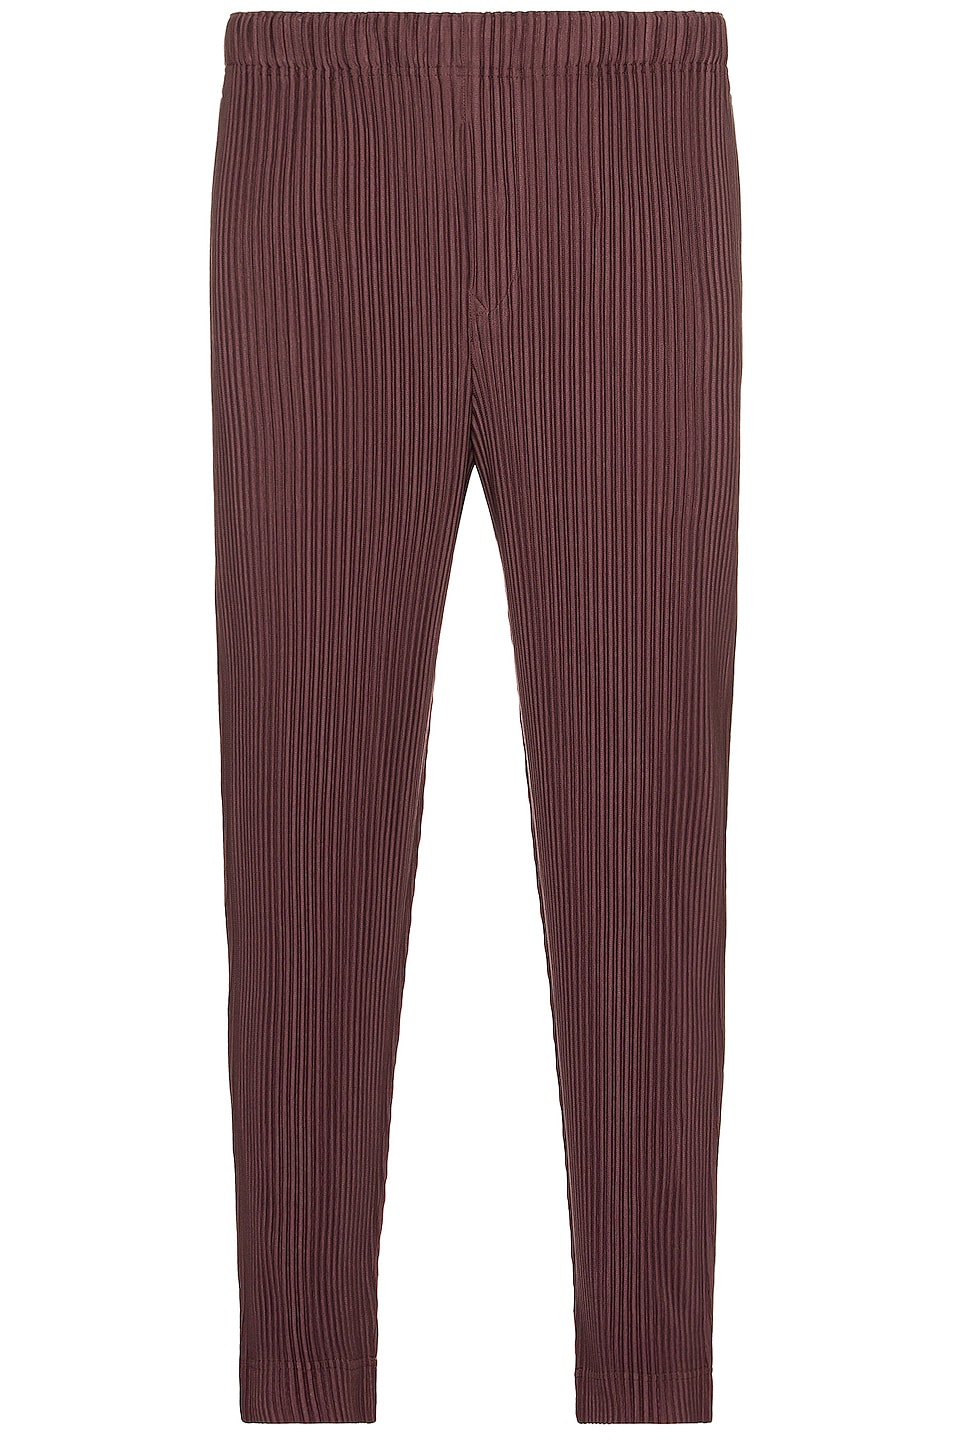 Image 1 of Homme Plisse Issey Miyake Pants in Cocoa Brown